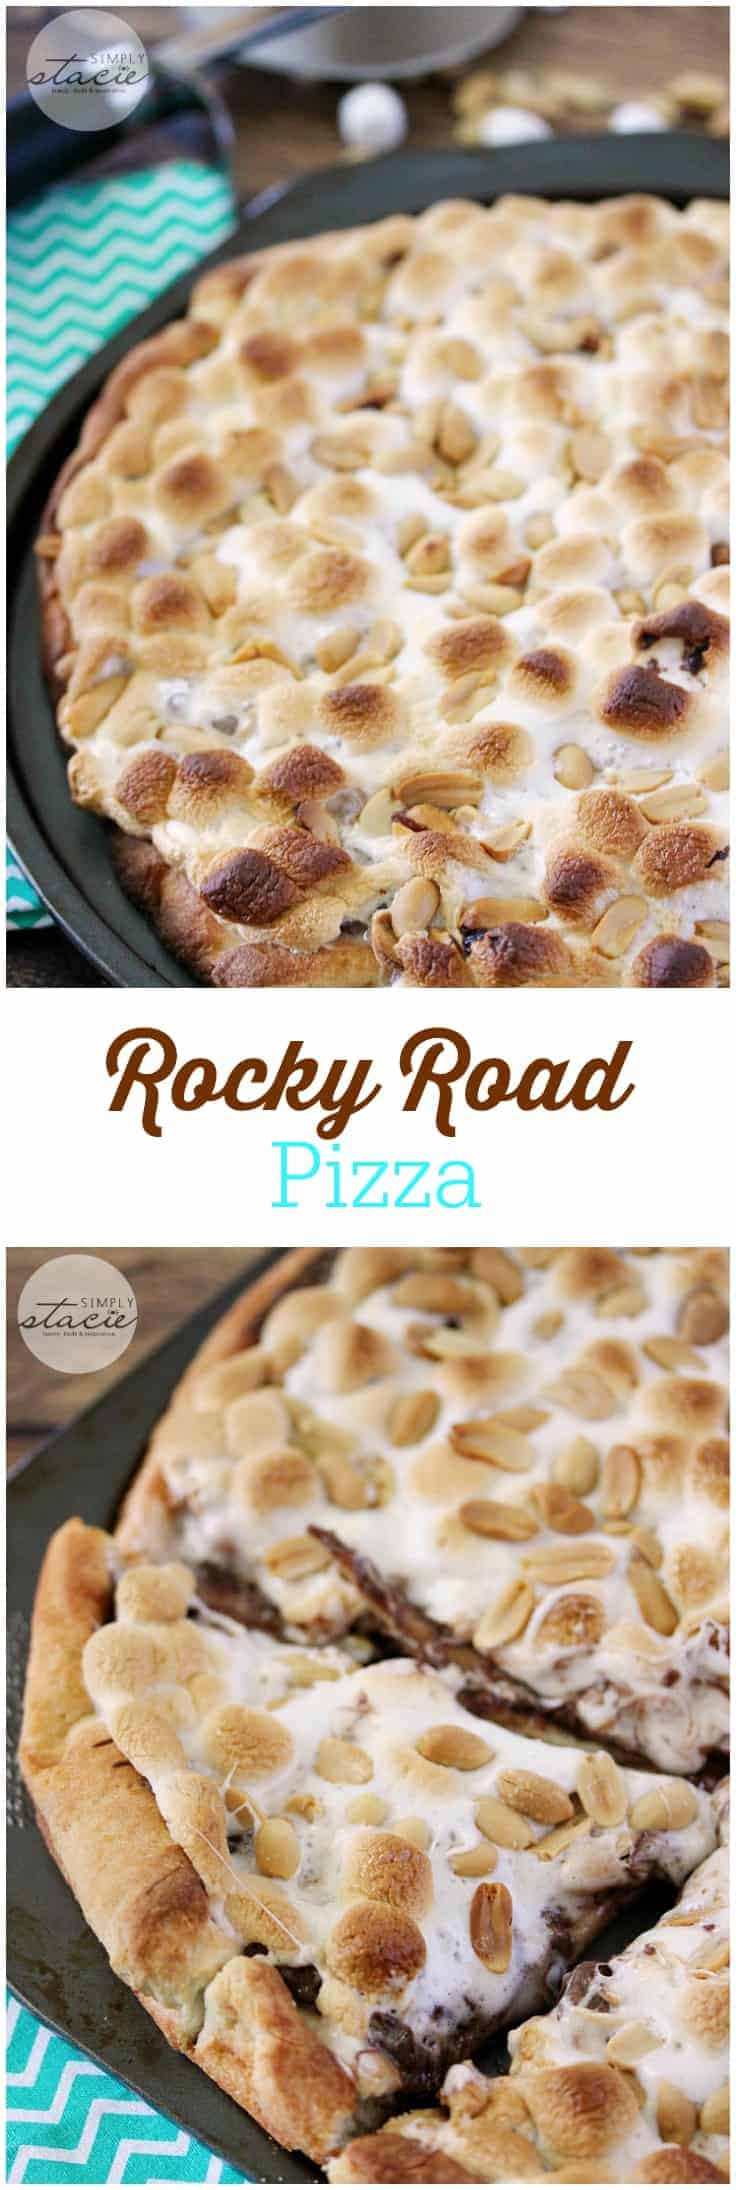 Rocky Road Pizza - Decadent dessert pizza! This pizza is loaded with creamy Nutella, toasted marshmallows, and crunchy peanuts.